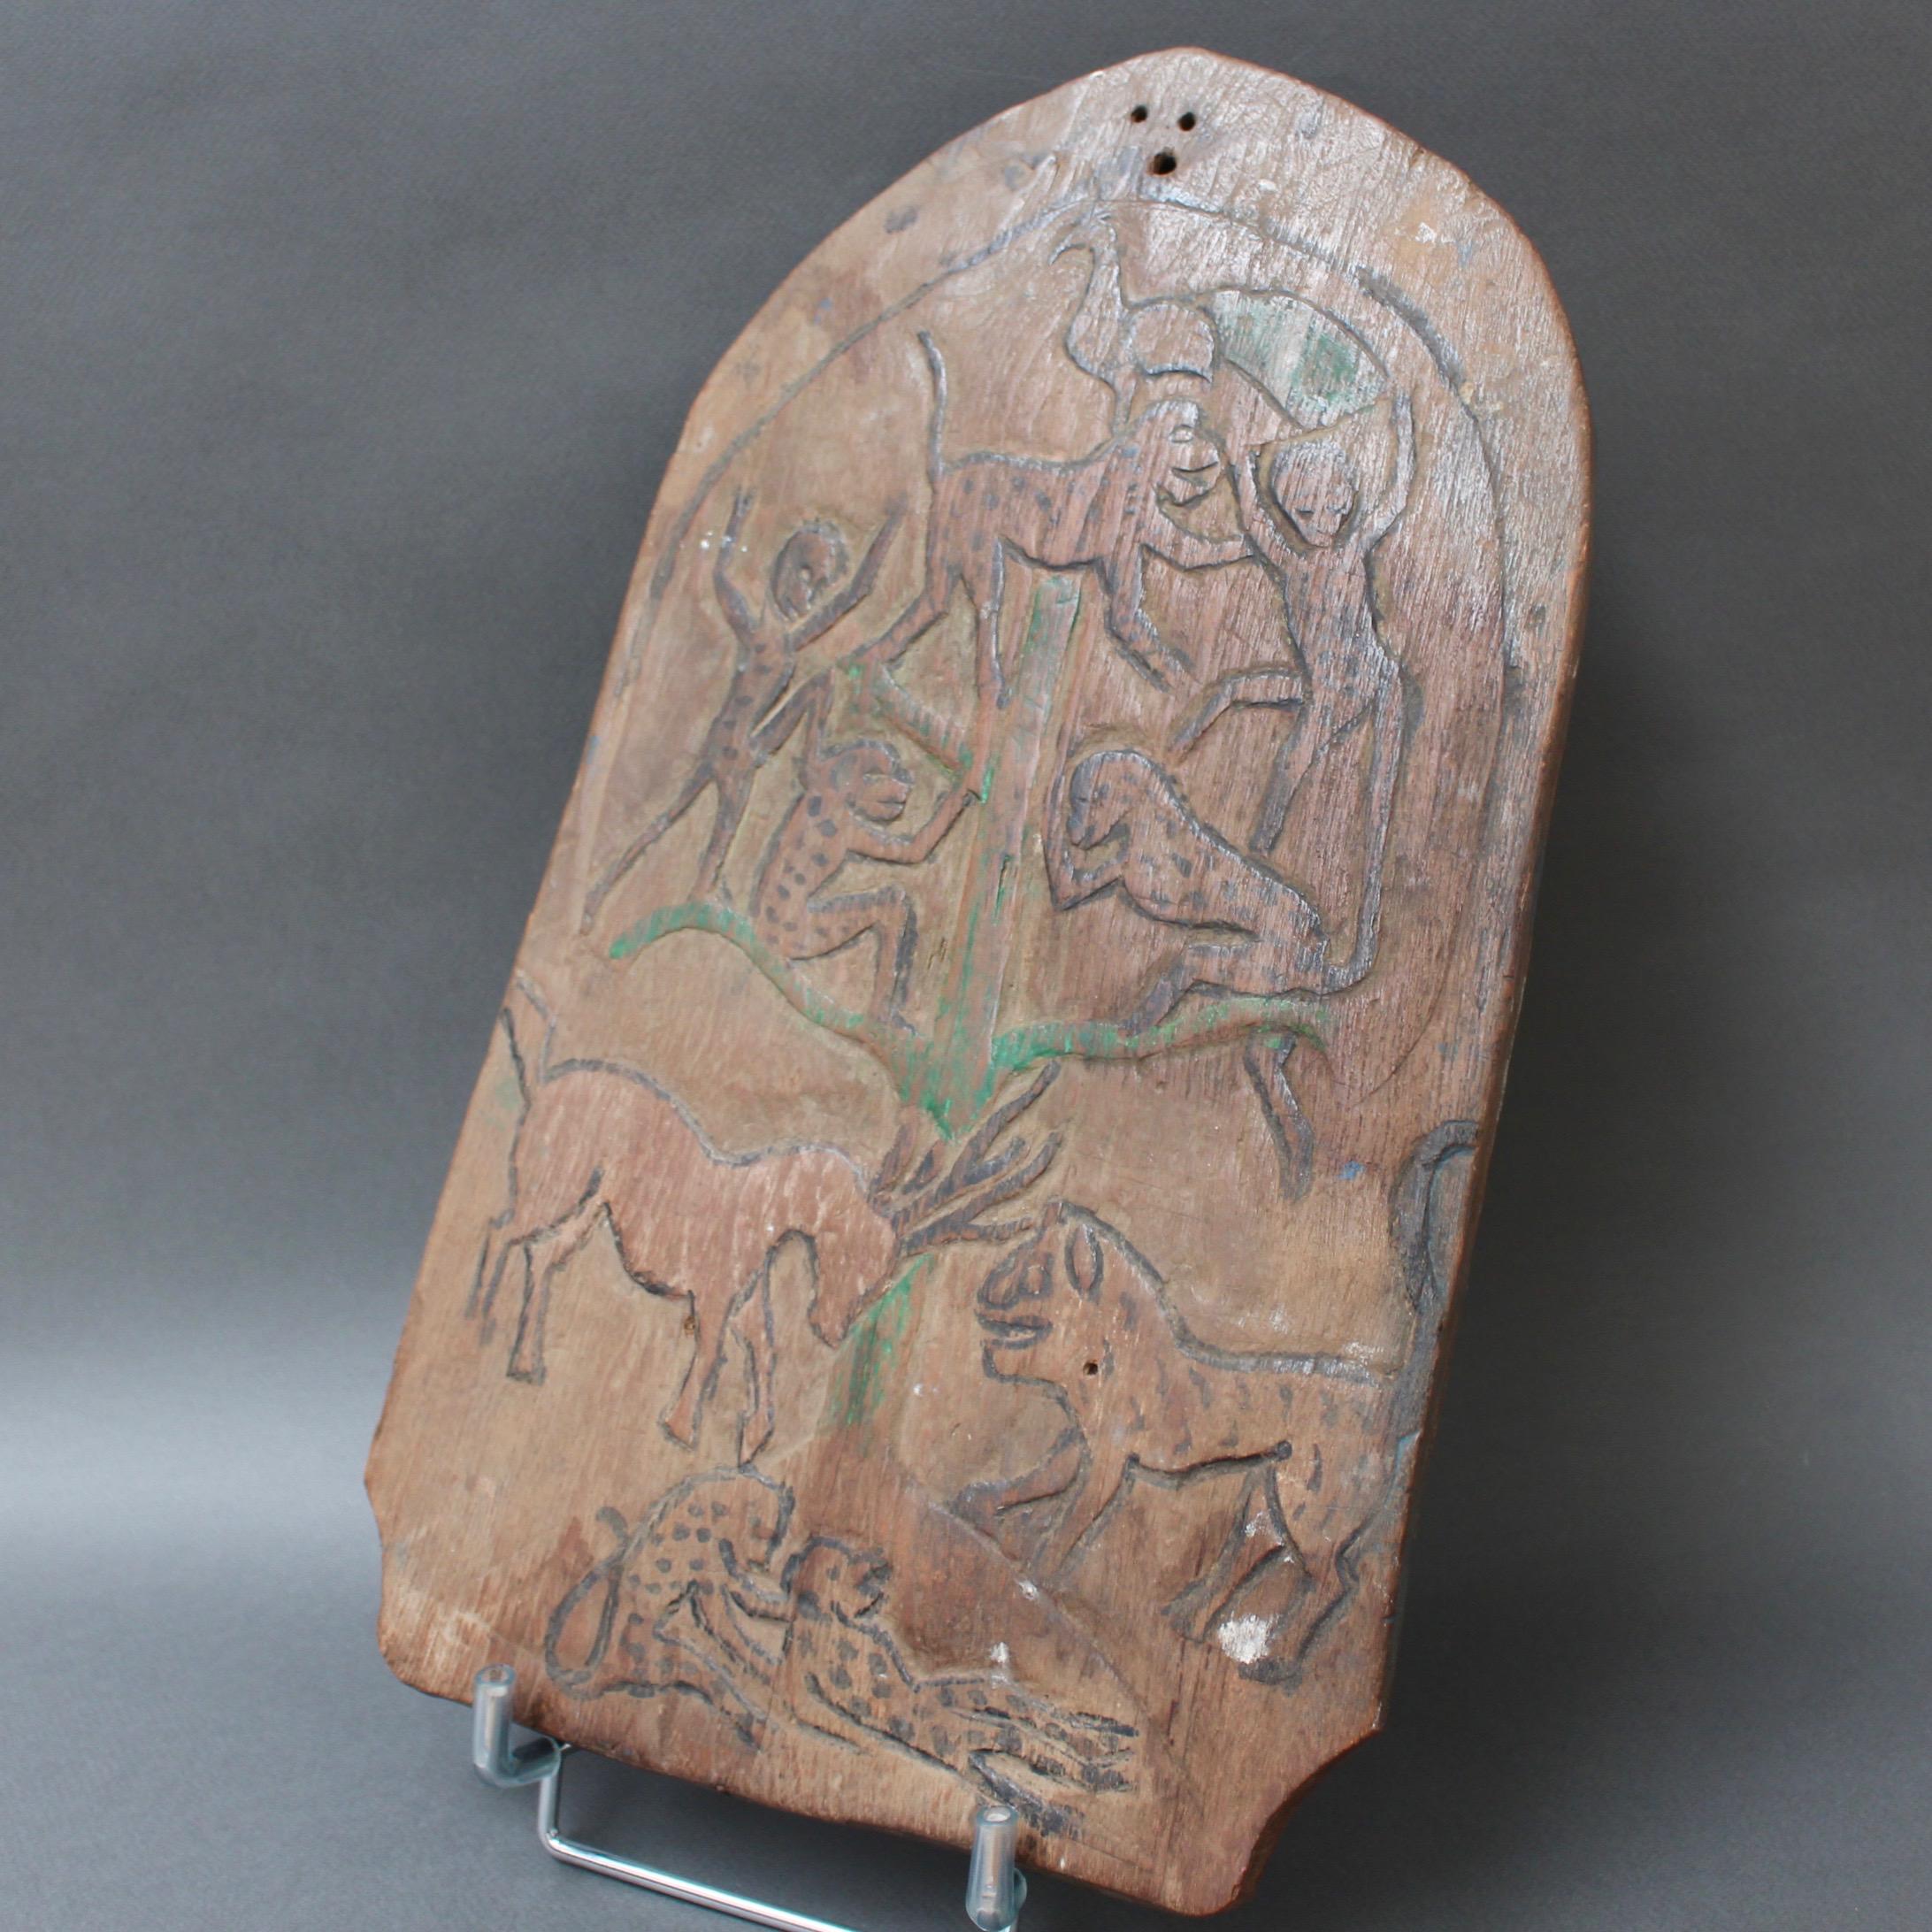 Double-sided carved wooden blawong board from Java, Indonesia (circa 1920s-1950s). Blawong boards were used to hold a pair of Keris daggers. They were fixed near the entrance of the household in order to use the Keris magic to protect the owner from